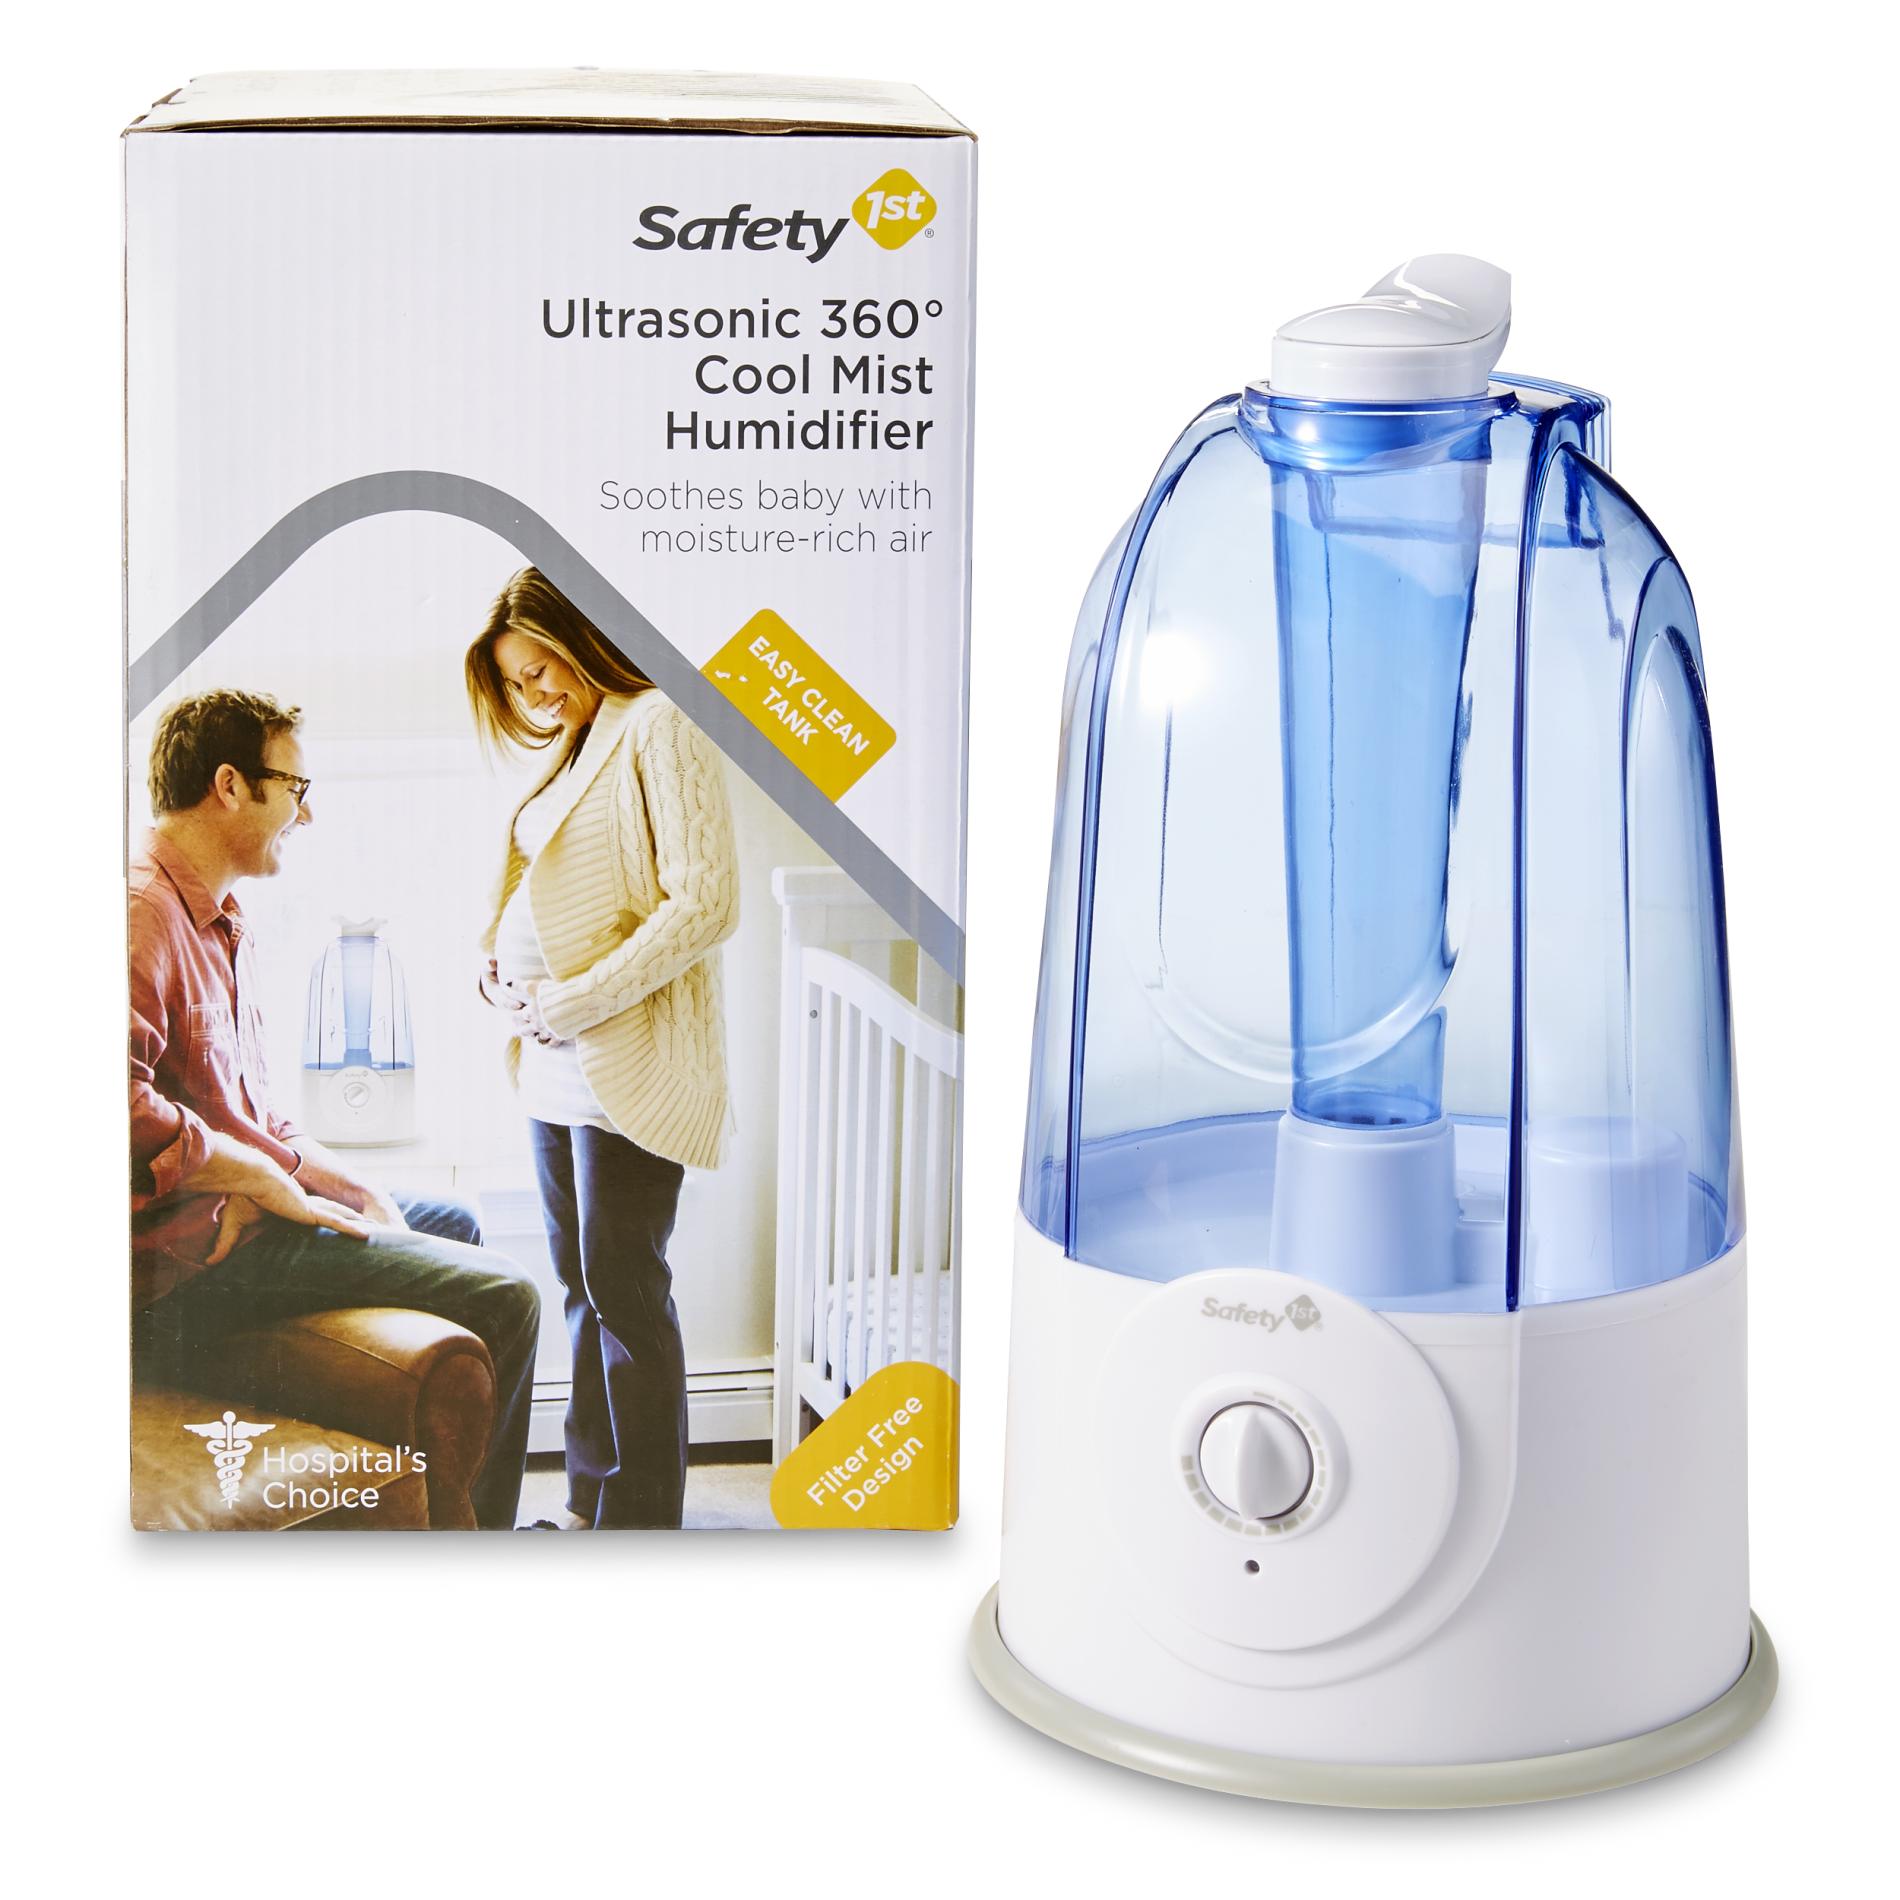 Safety 1st Ultrasonic 360-Degree Cool Mist Humidifier